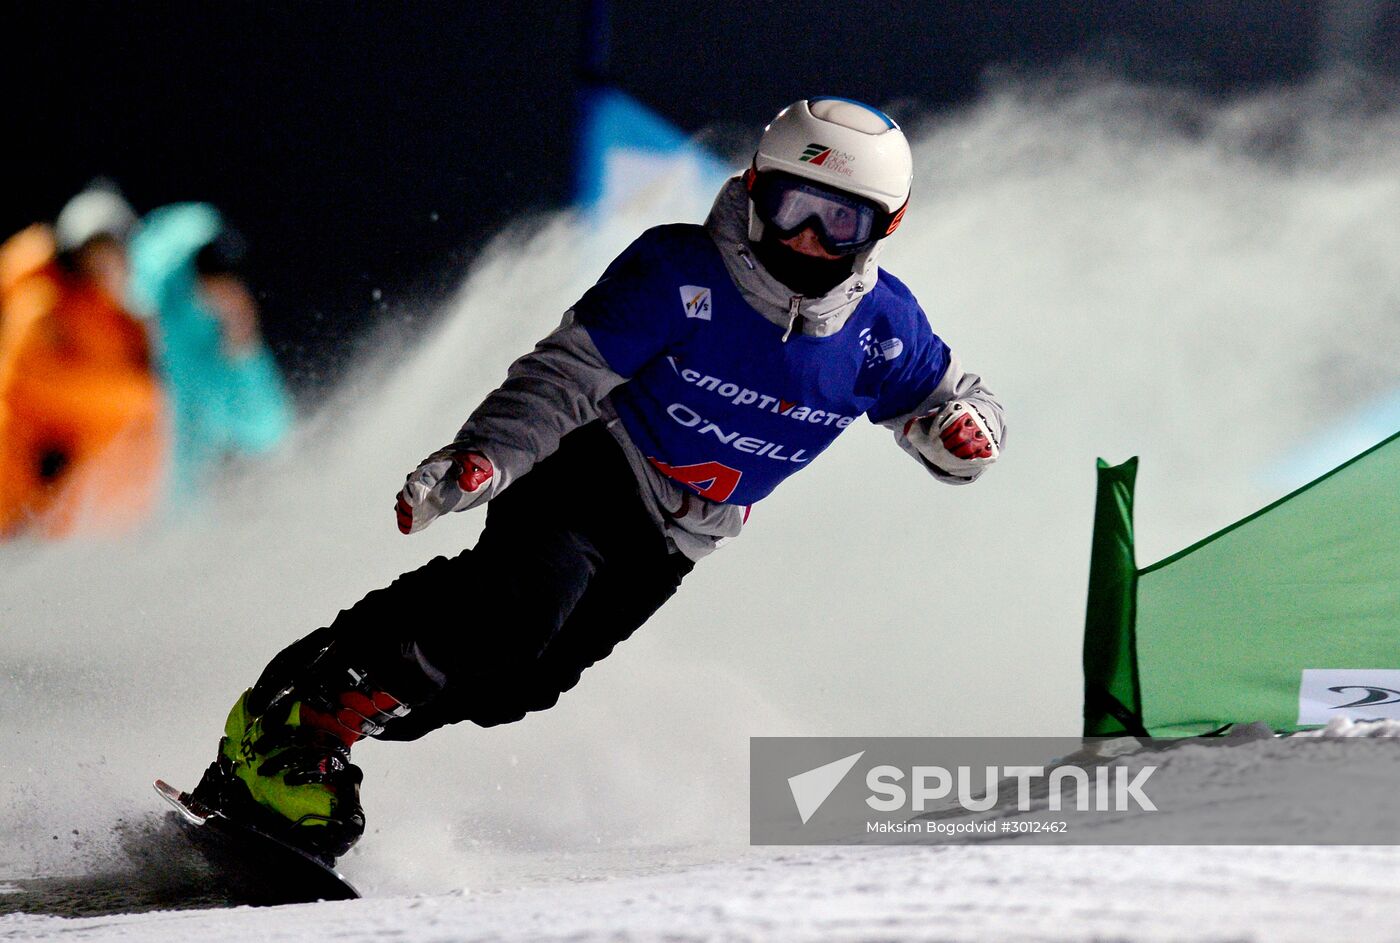 Russian snowboarding championships. Parallel giant slalom